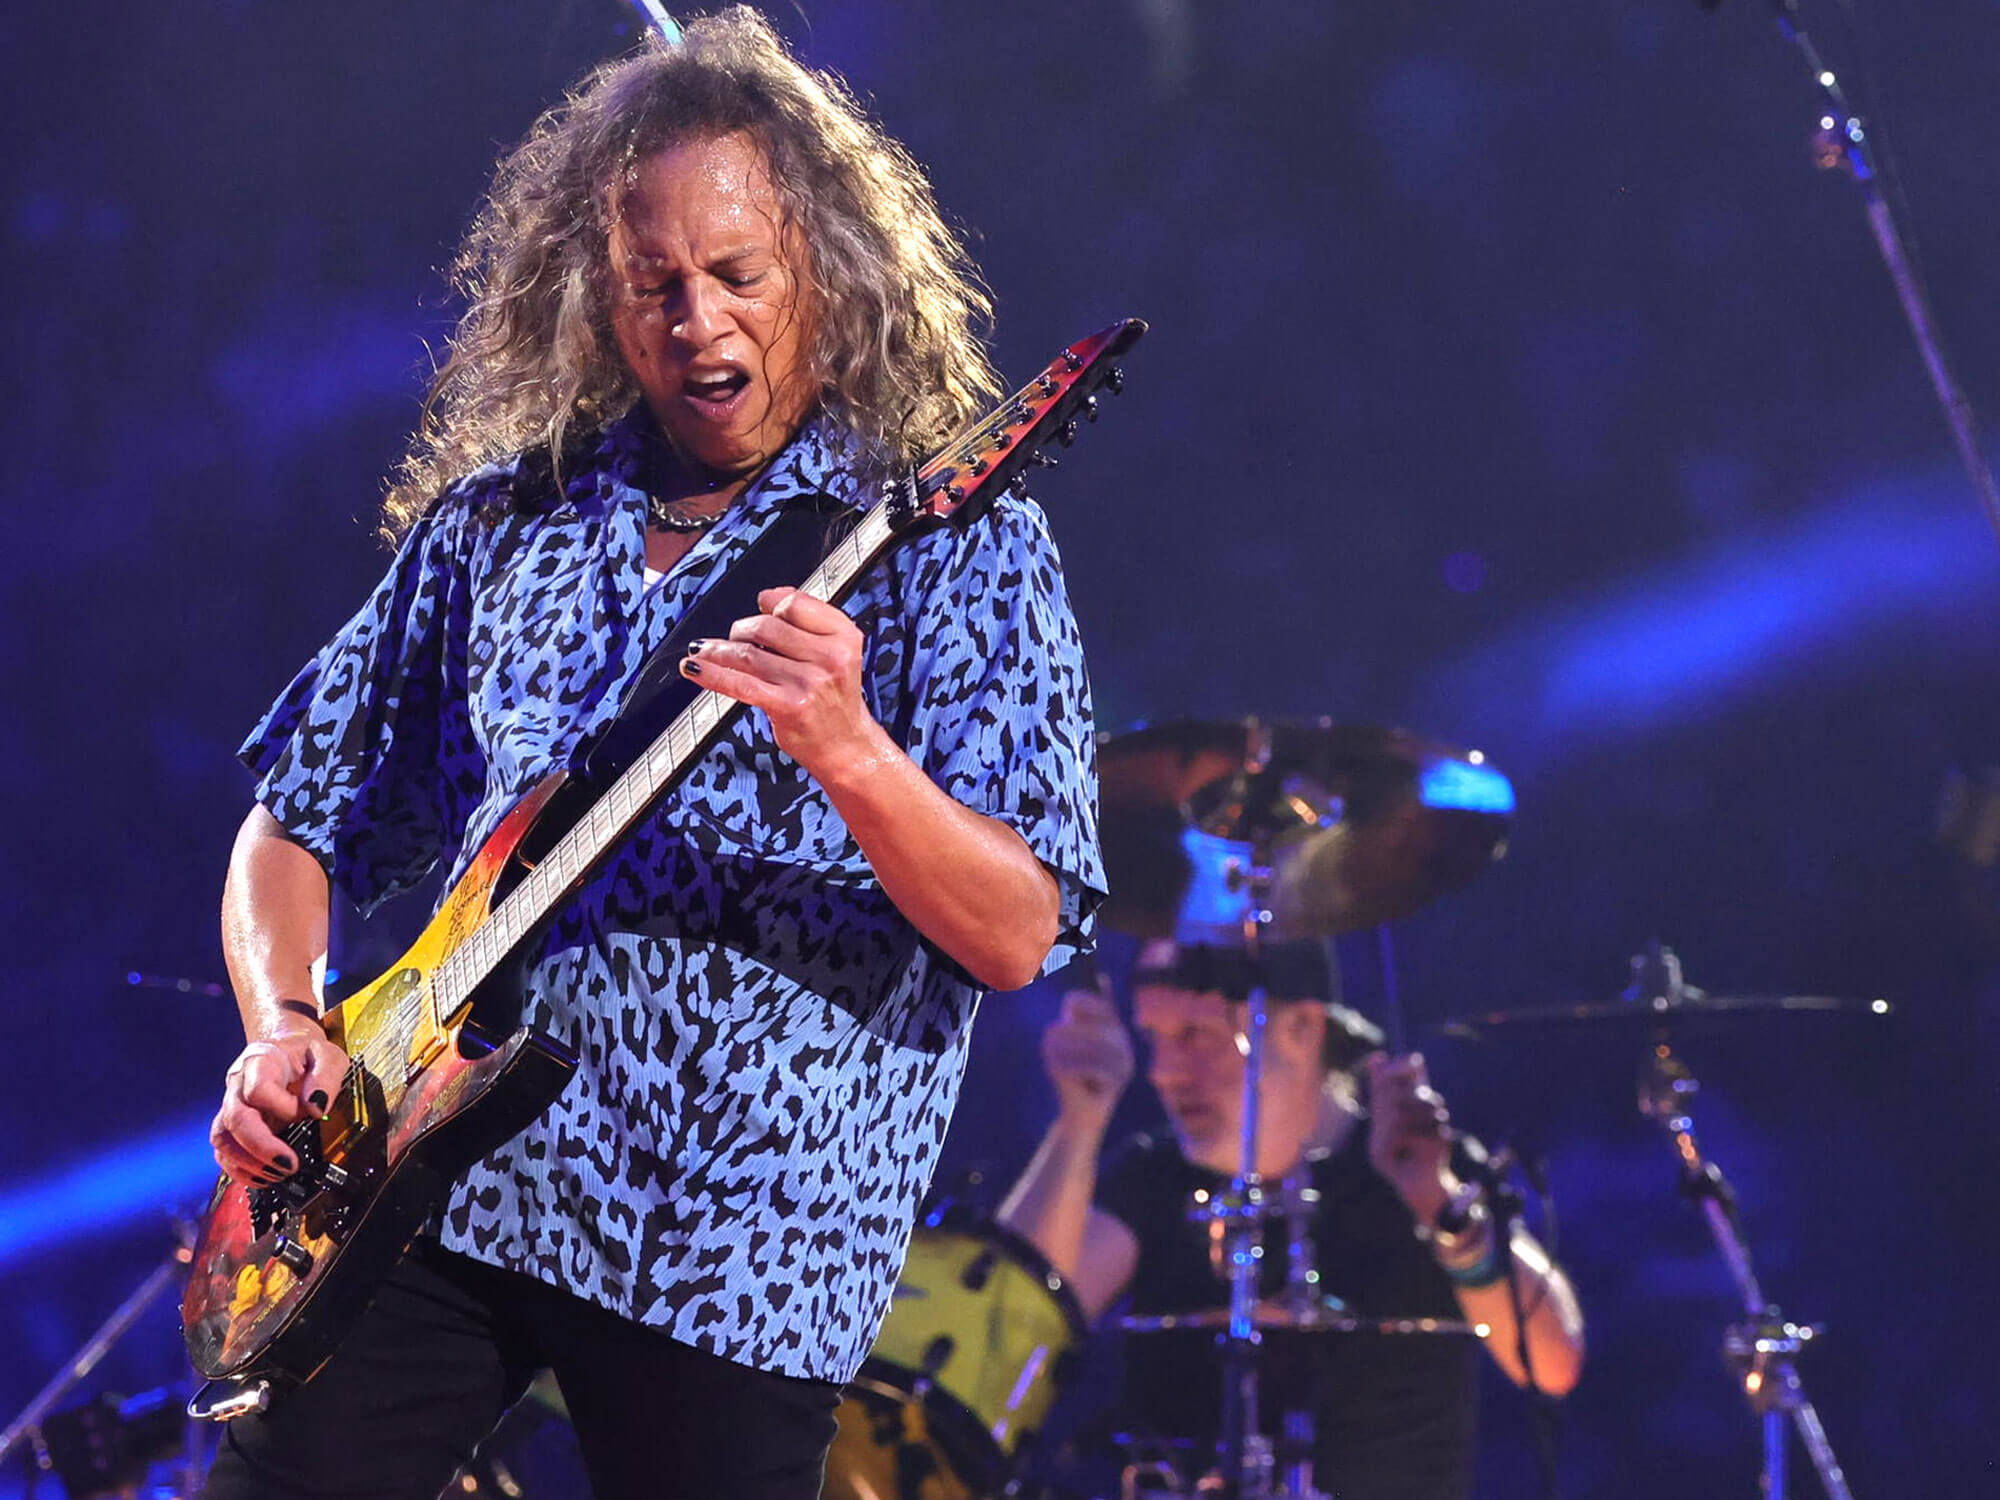 Kirk Hammett performing onstage with Lars Ulrich in the background